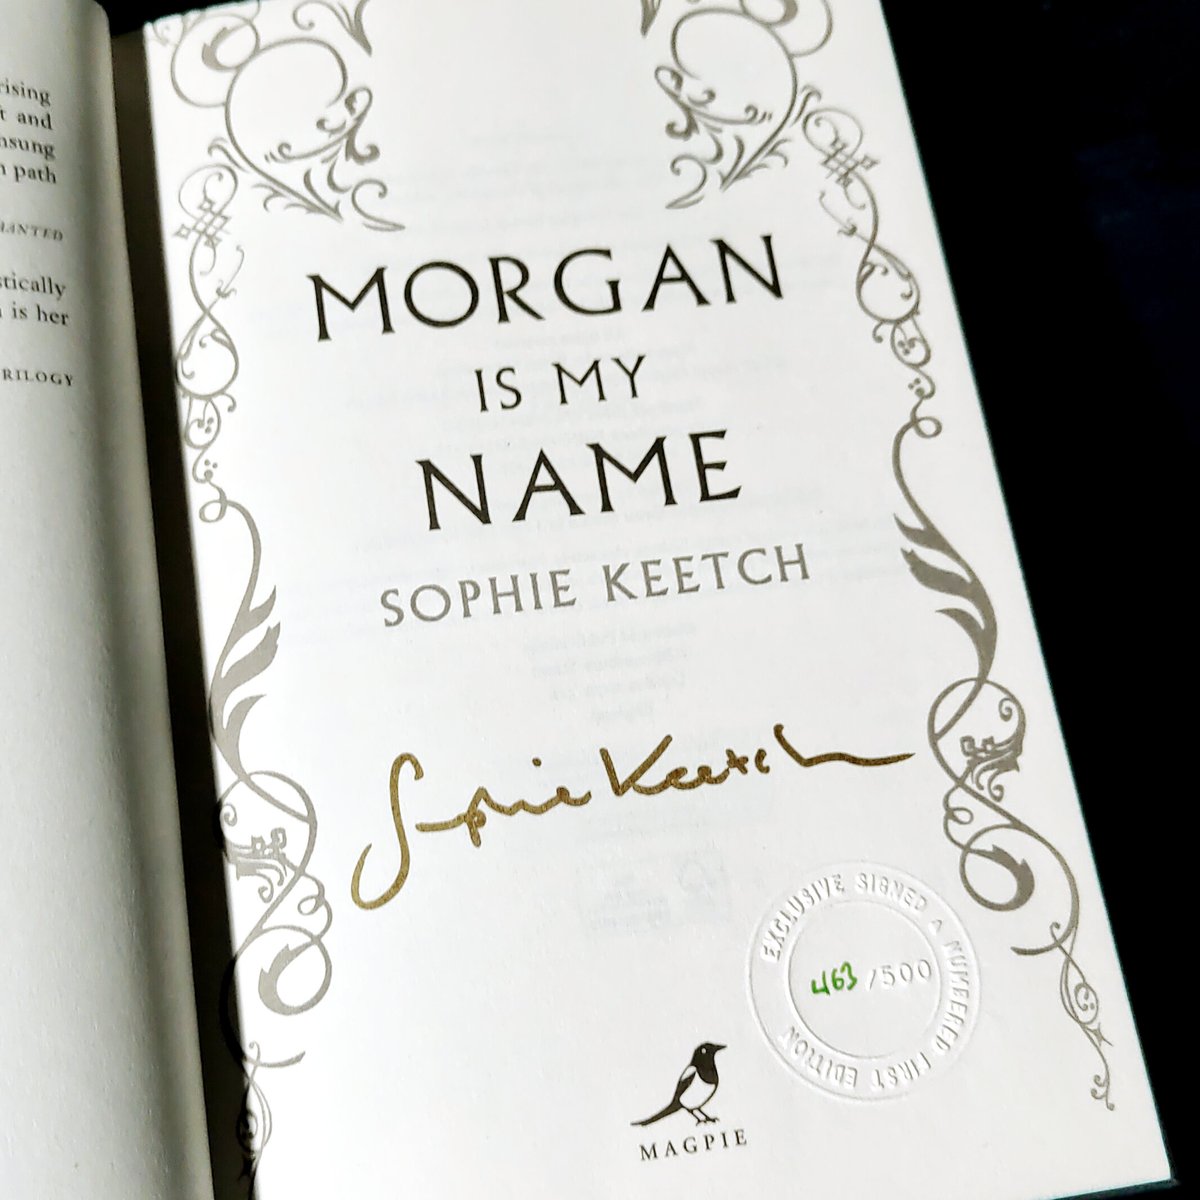 #NewSwag
#MorganIsMyName by @SophKWrites
@GoldsboroBooks exclusive signed & numbered limited #FirstEdition #Hardcover with green spayed edges

#BookMail #MagpieBooks #OneWorldPublications @oneworldpublications #HistoricalFiction #MorganLeFay